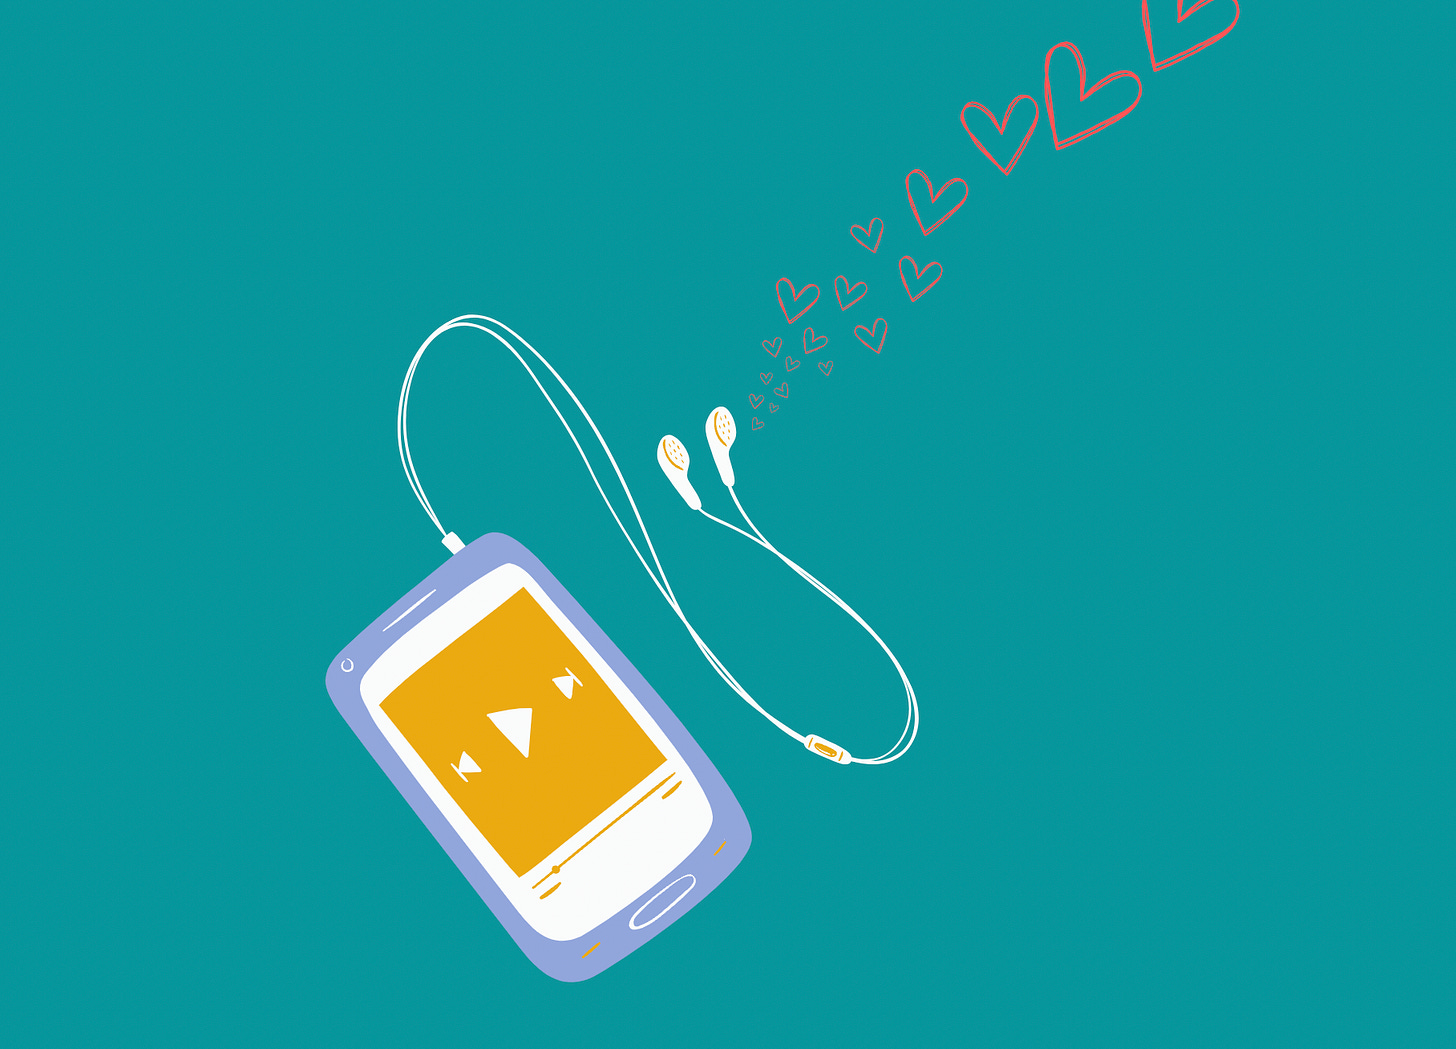 drawing of a phone with a player interface on the screen and hearts coming out of the earphones